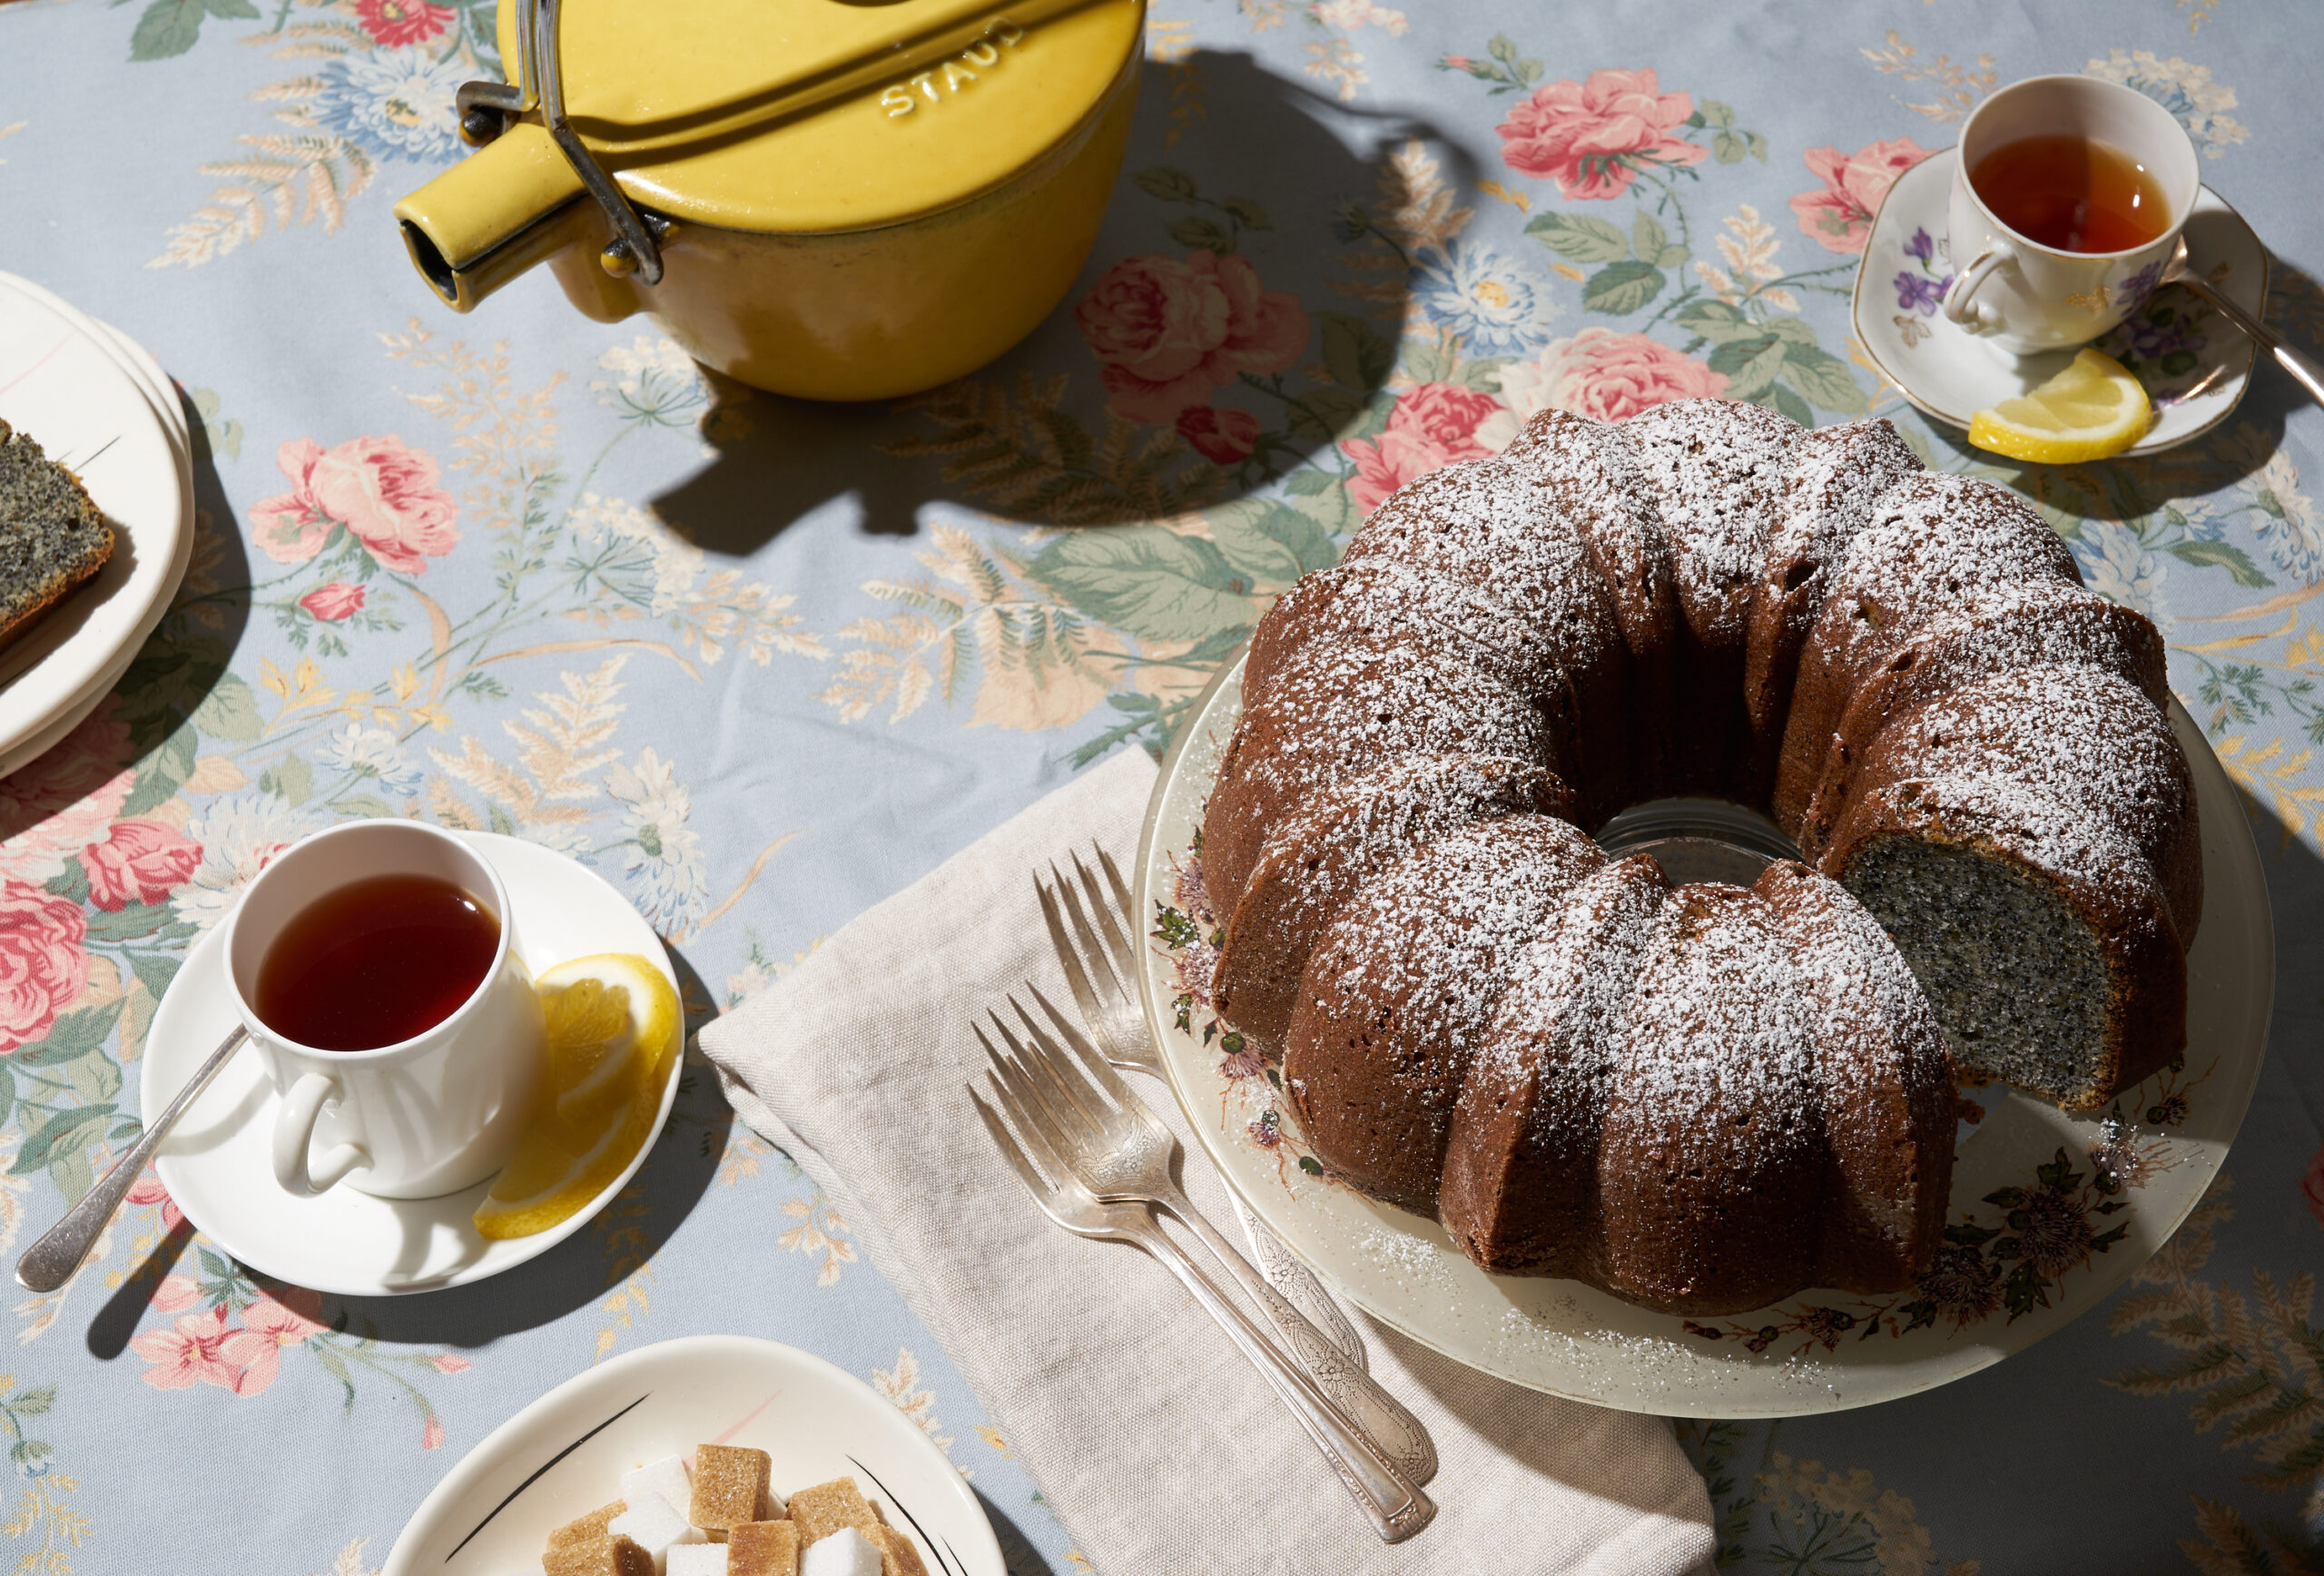 Poppyseed bundt cake on a plate atop a blue tablecloth. Next to it are small glasses of tea with lemon slices.